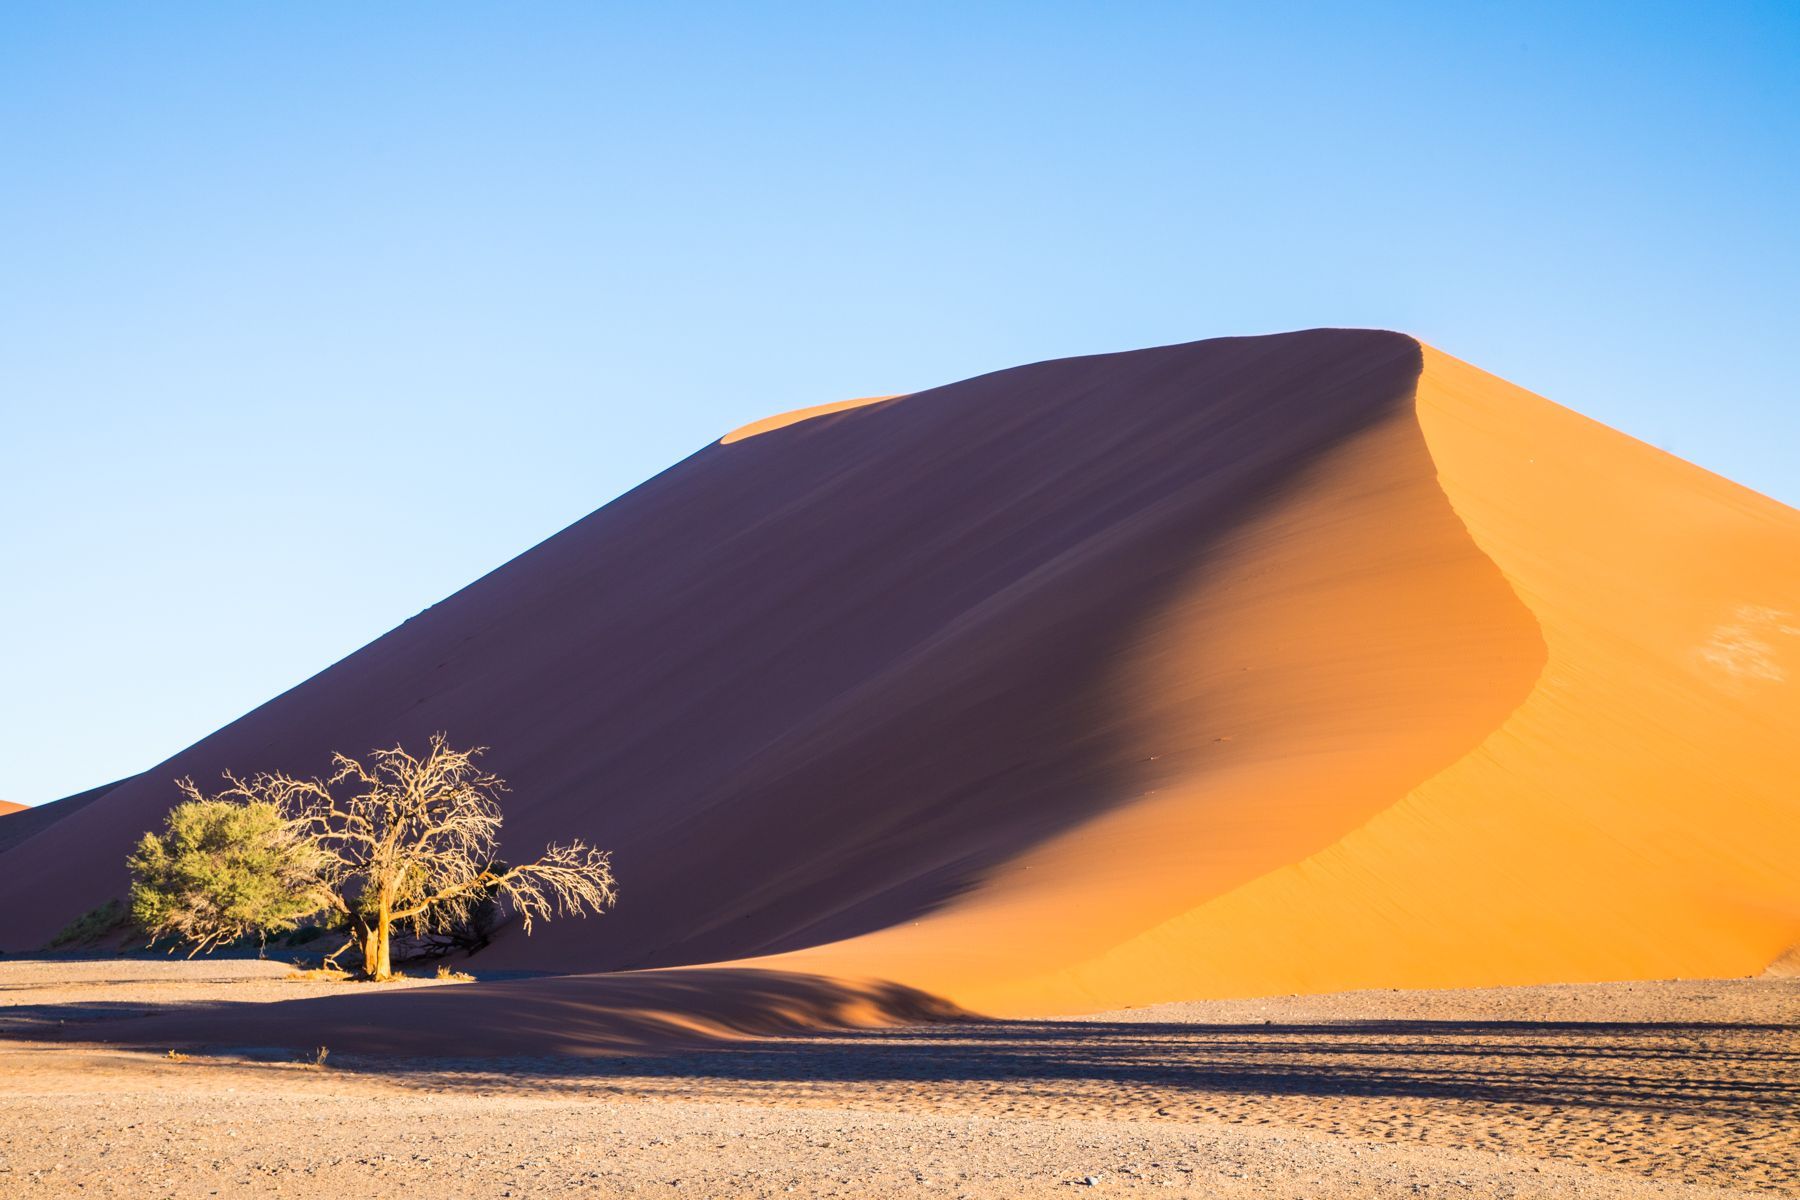 Landscape photography on our tour of Namibia